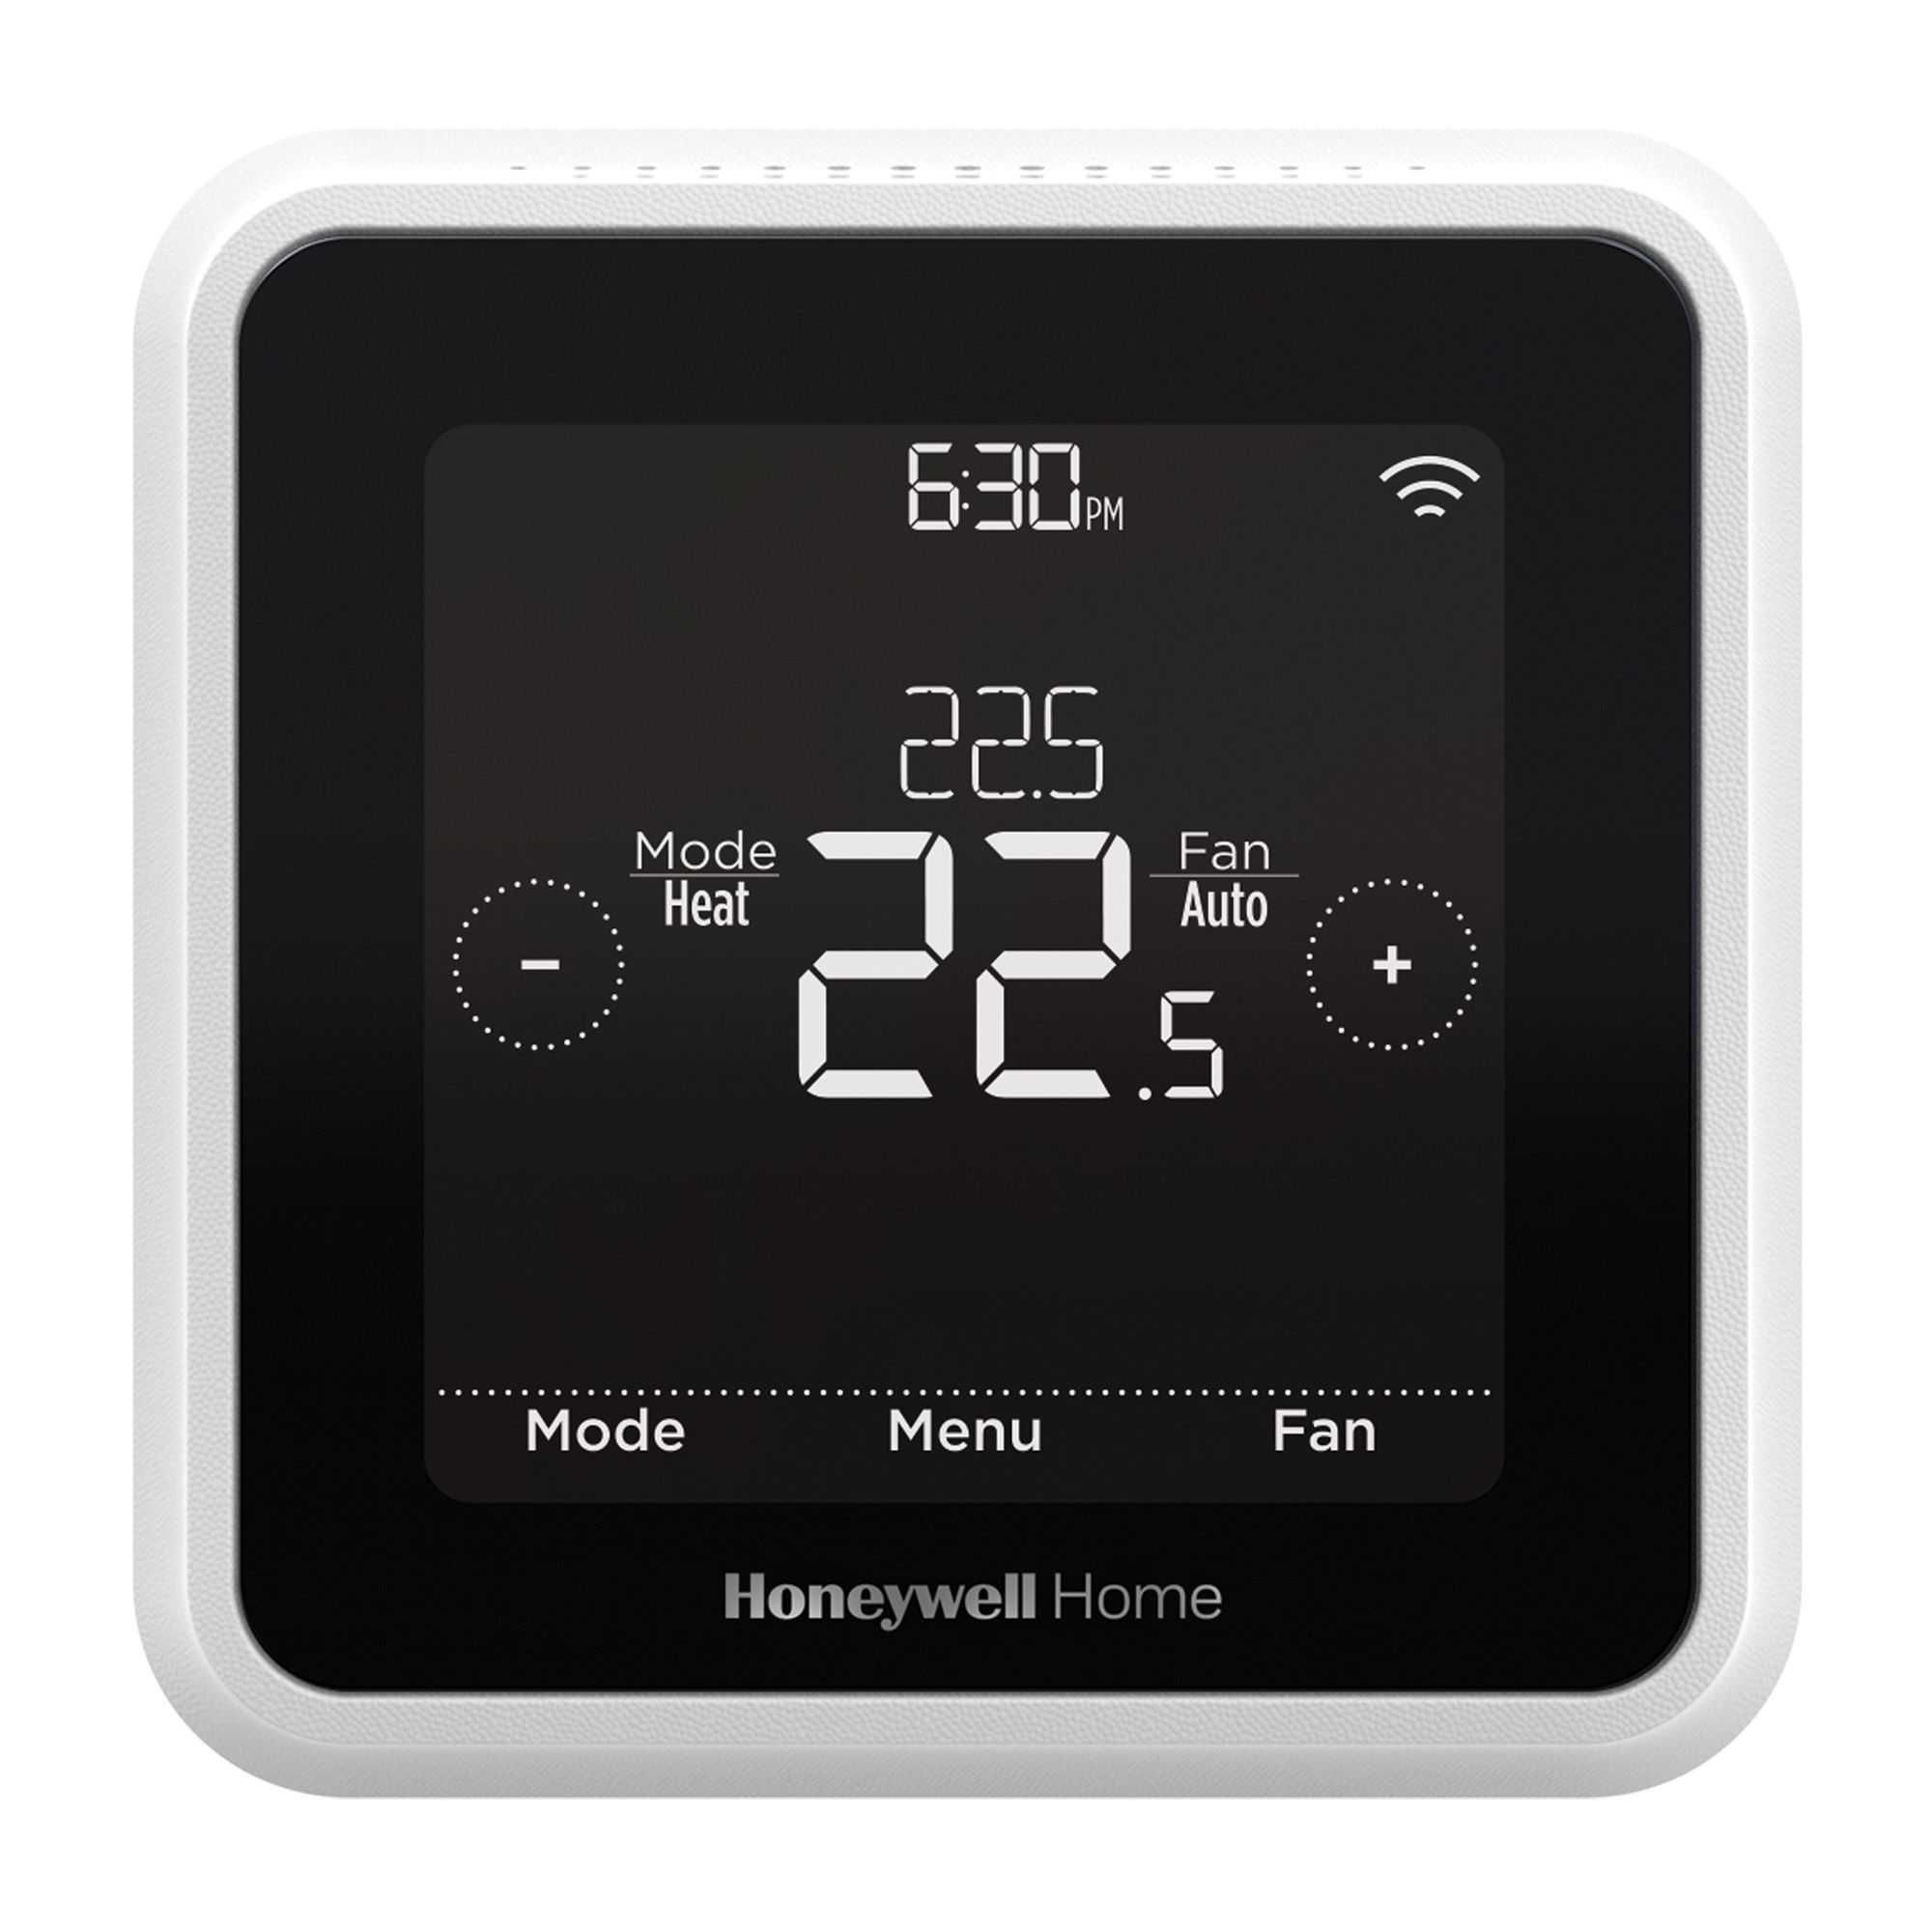 T5 Smart Thermostat from Honeywell